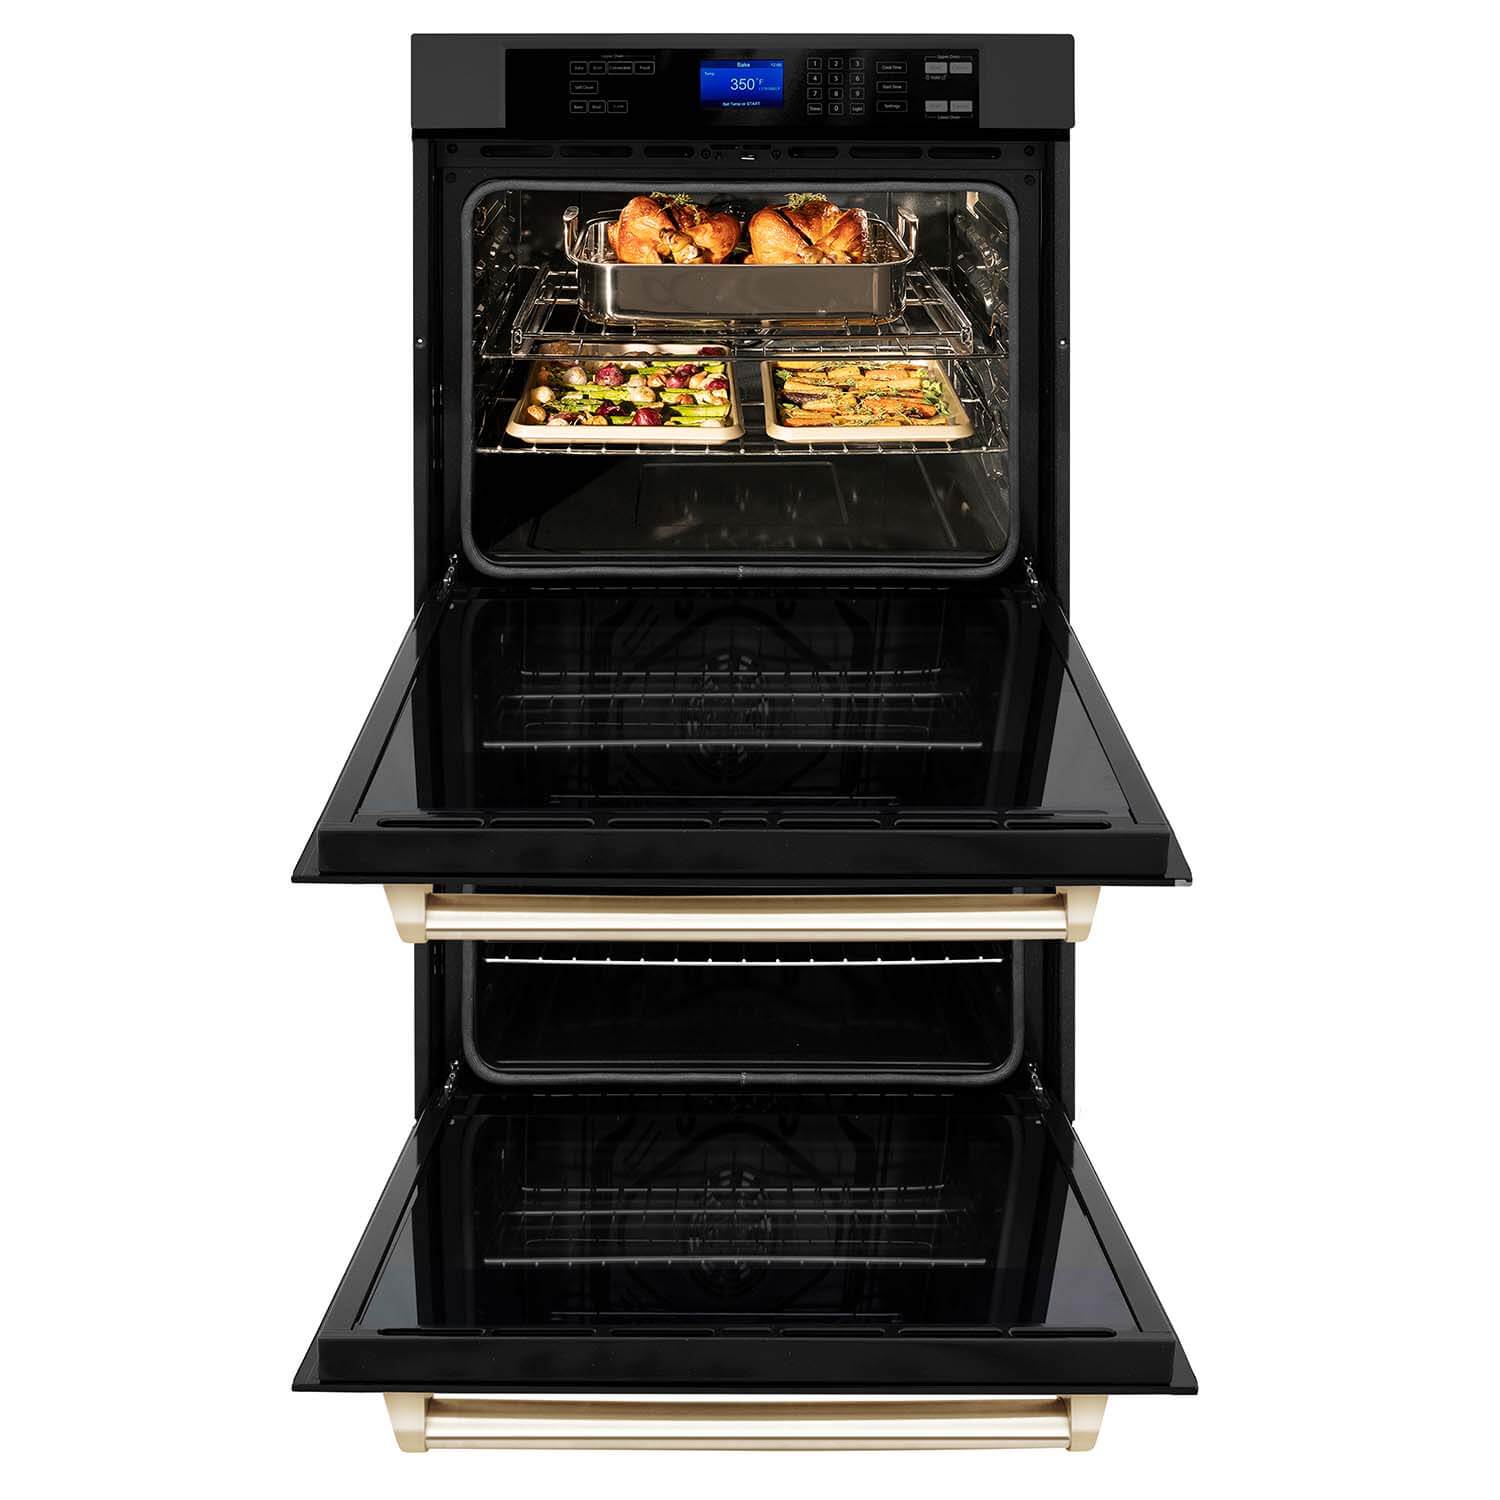 ZLINE Autograph Edition 30 in. Electric Double Wall Oven with Self Clean and True Convection in Black Stainless Steel and Polished Gold Accents (AWDZ-30-BS-G) front, open.